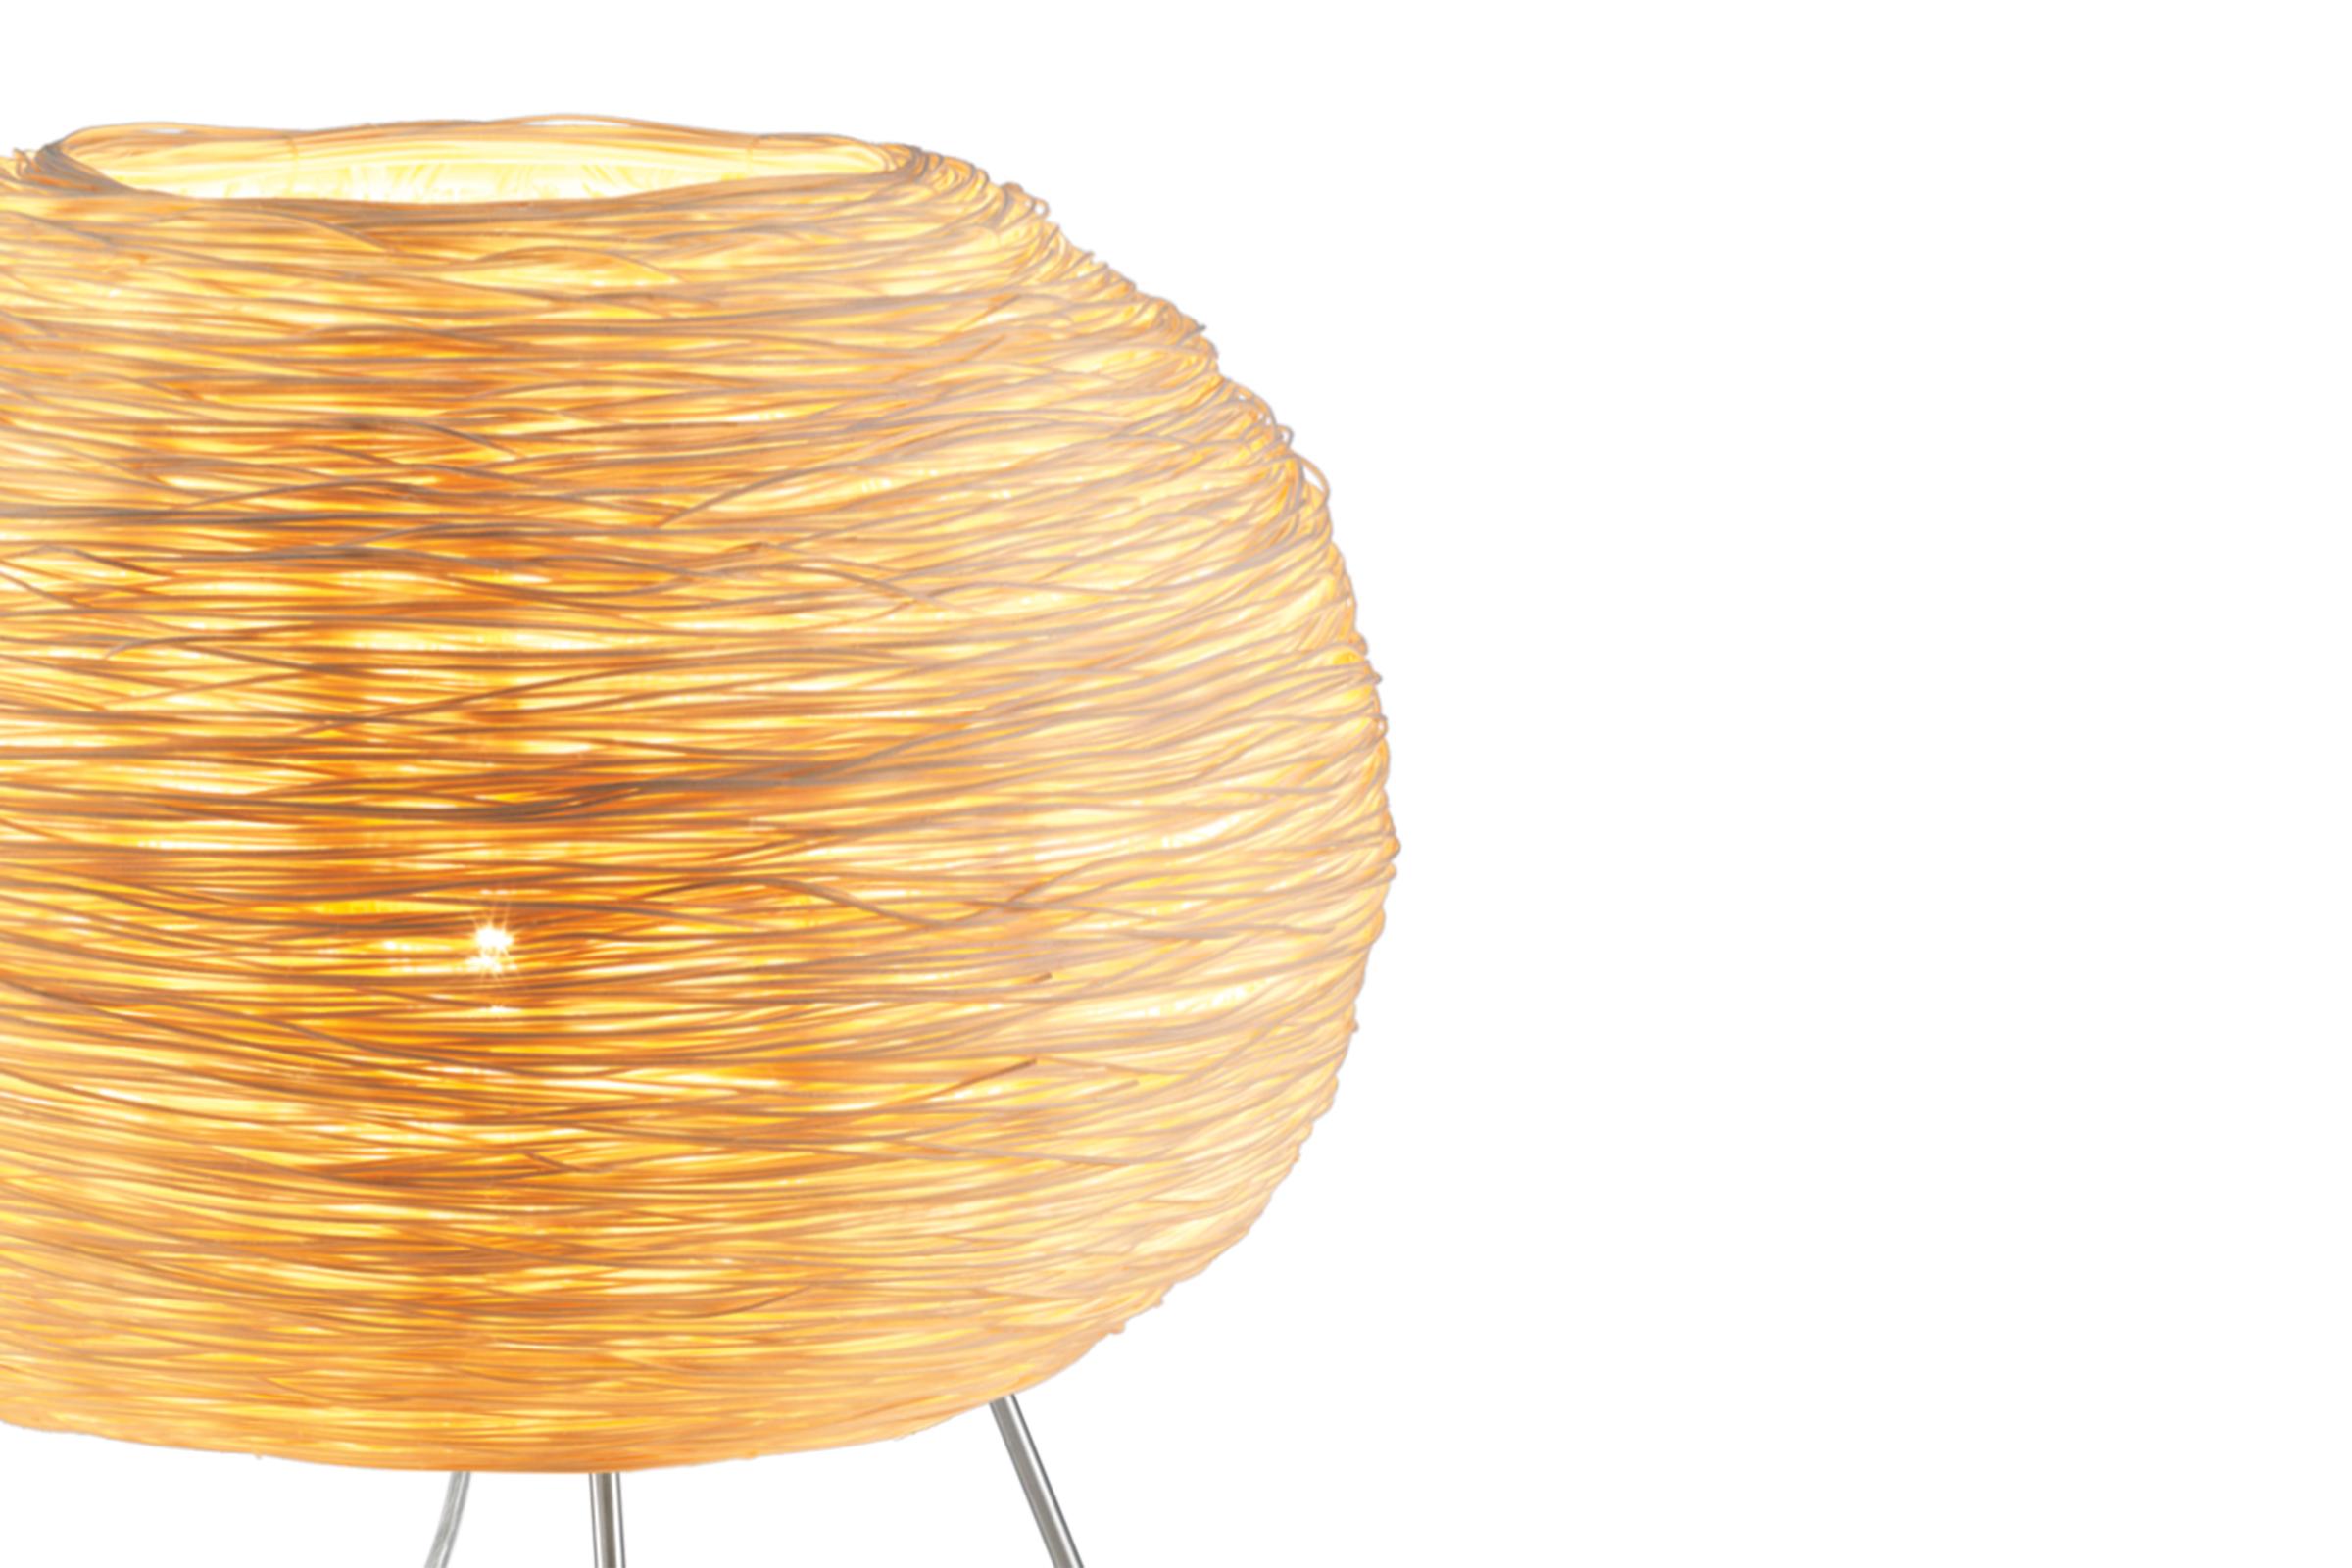 Nest table light by Ango using 1 mm. rattan wire. The elemental and universal form of a tripod supporting a nest like vessel that is incarnated by the light inside, which diffuses literally through kilometres of laterally wound fine rattan filament.